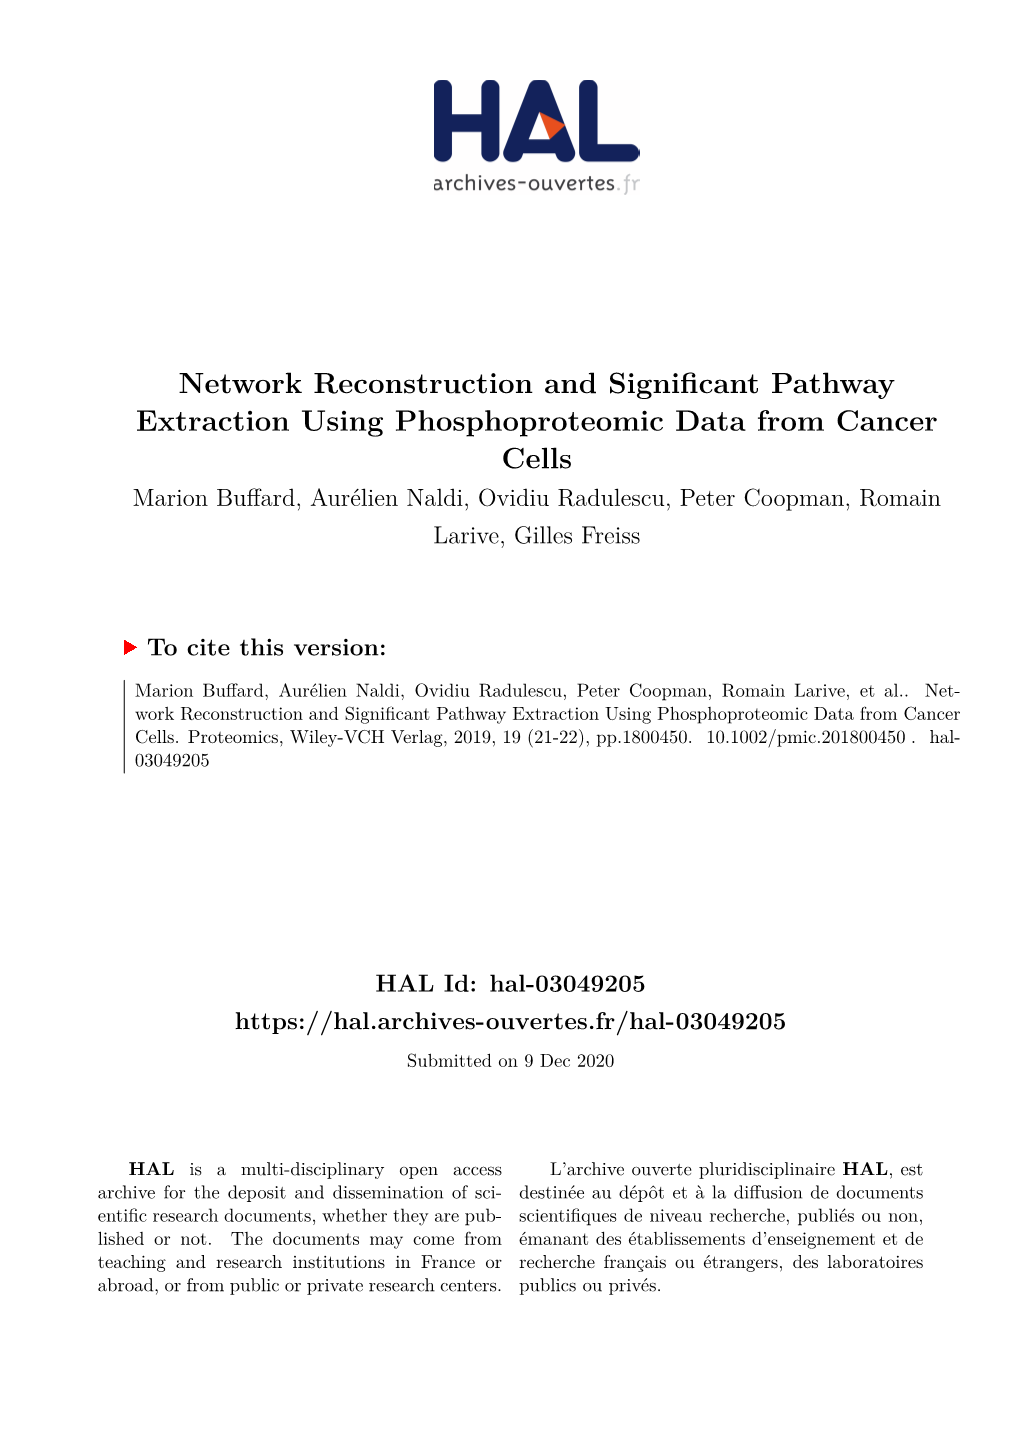 Network Reconstruction and Significant Pathway Extraction